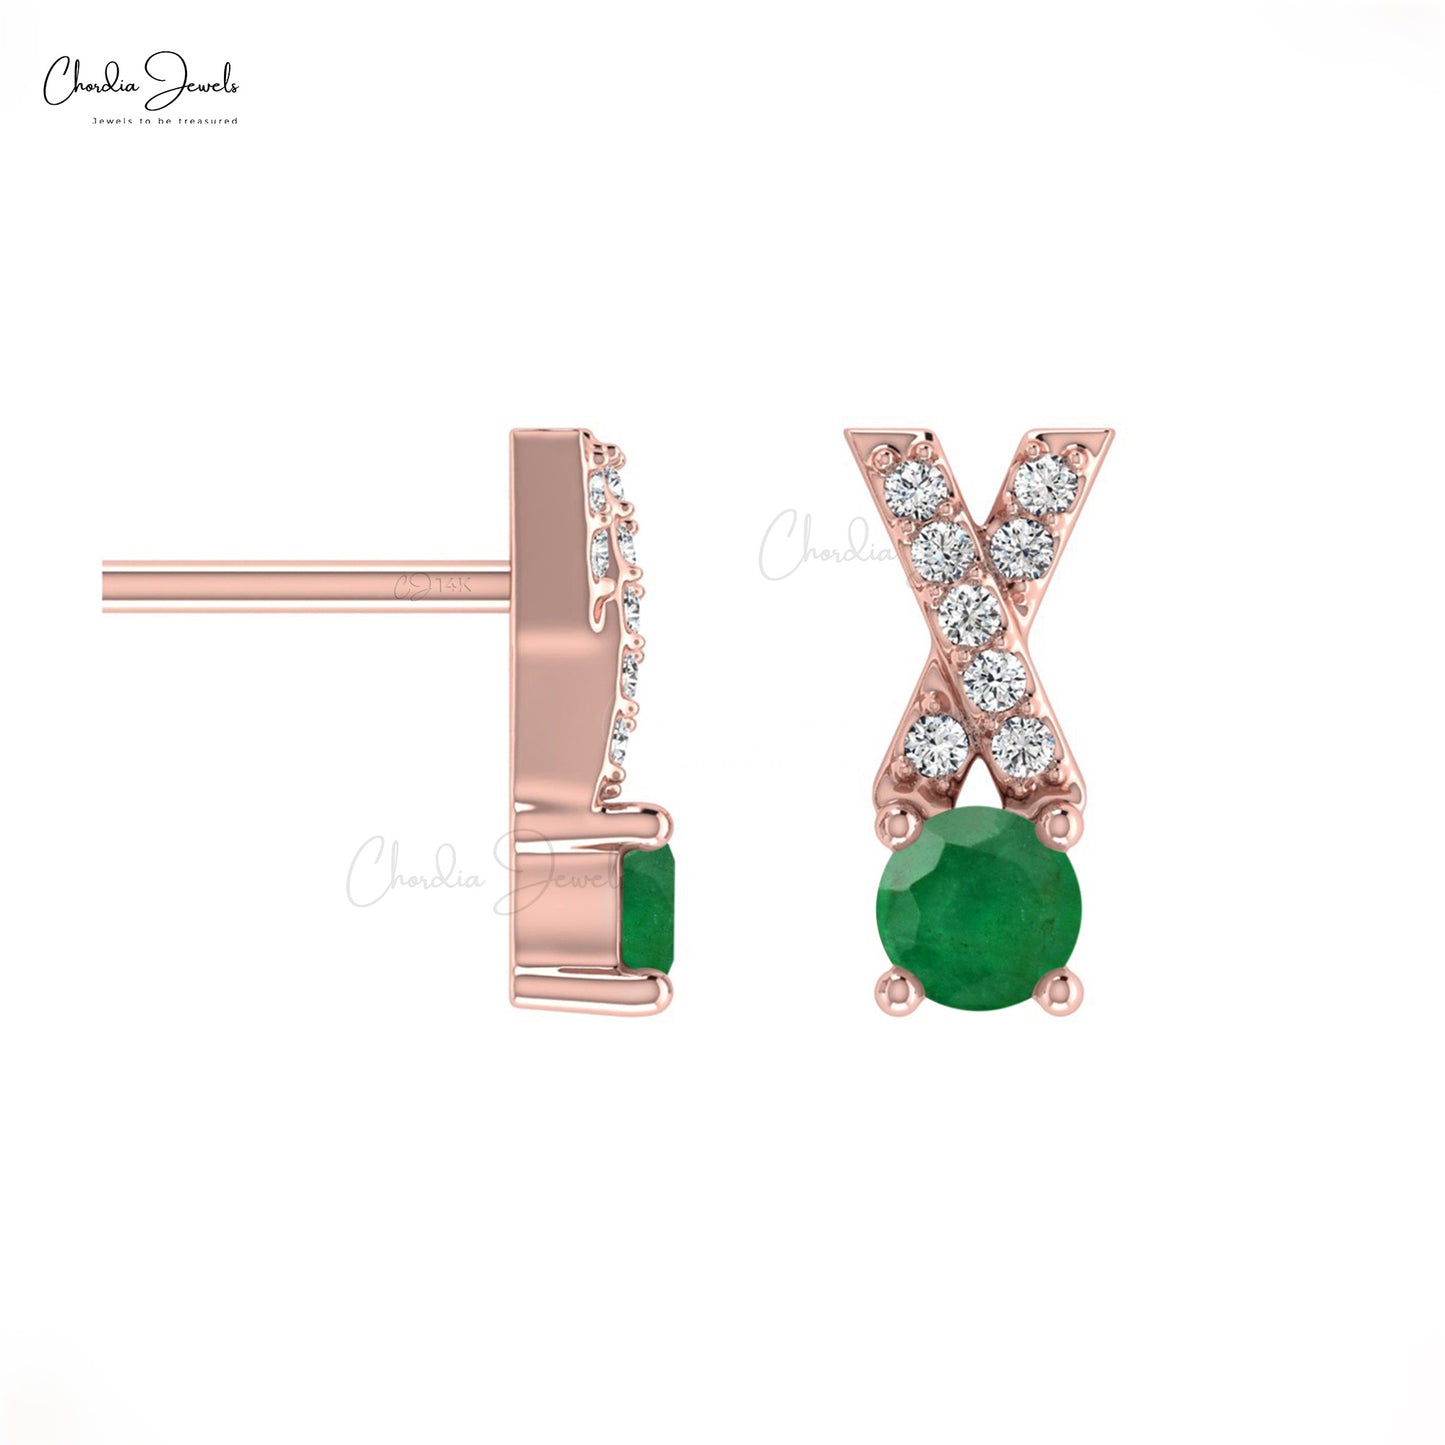 Complete your overall look with these real emerald earrings.